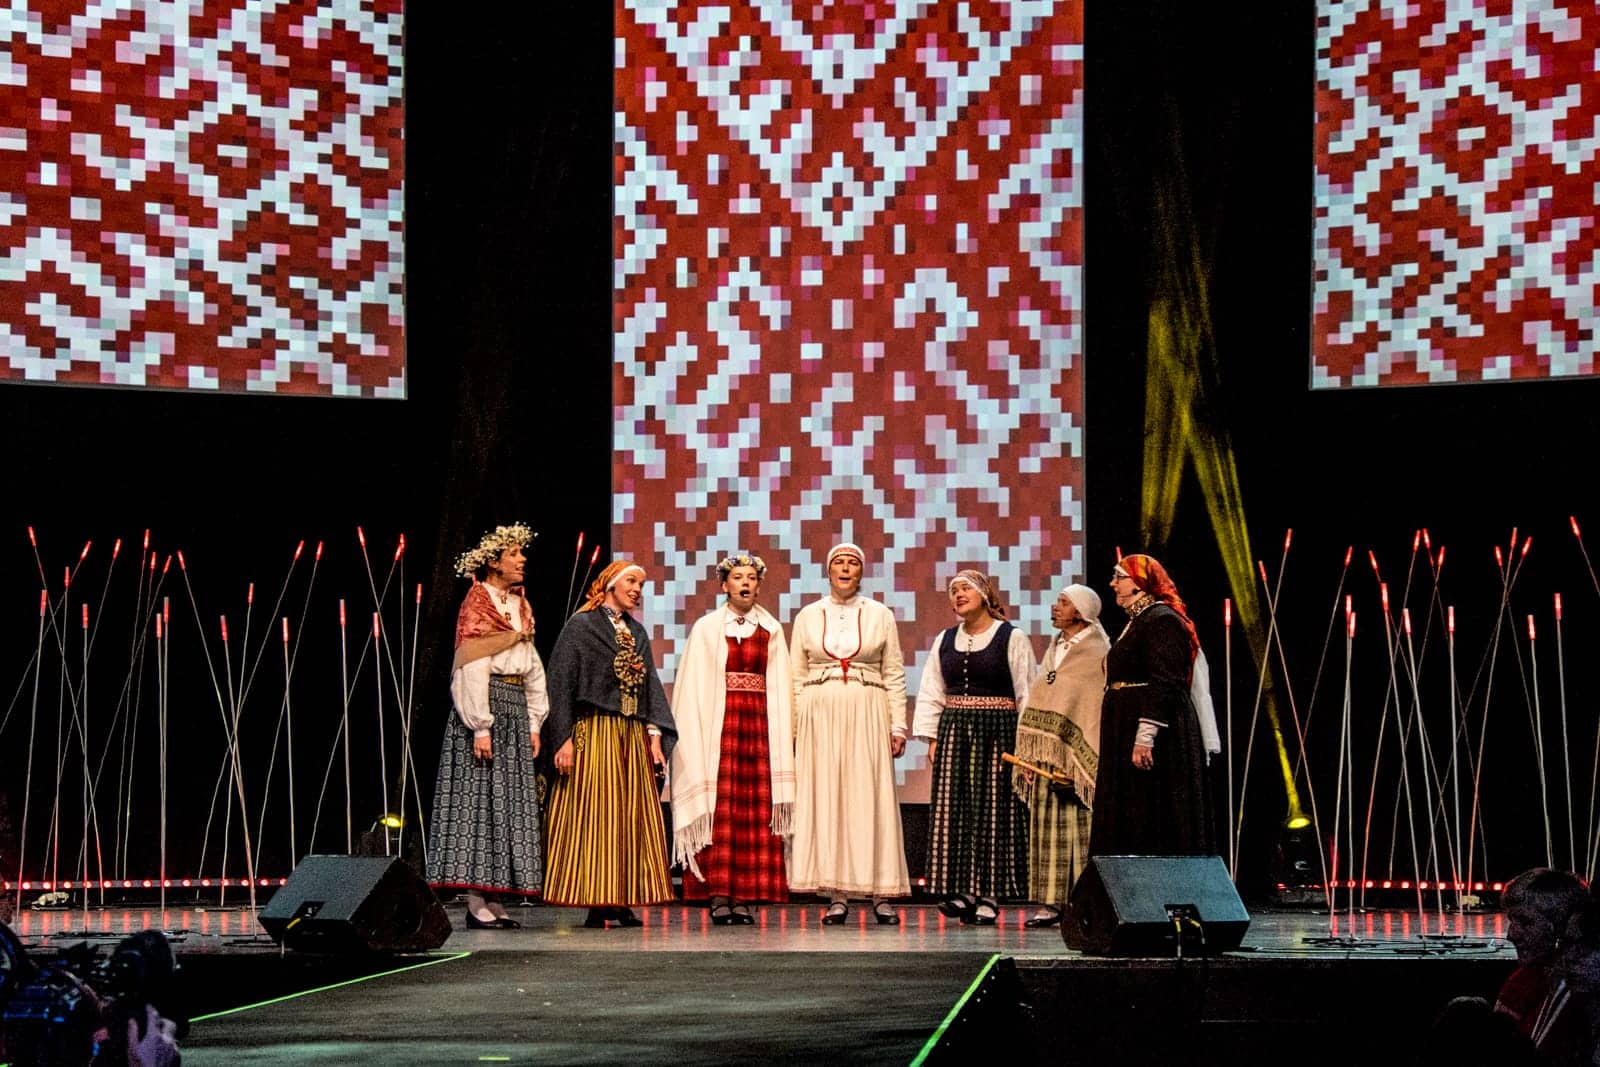 Folk costume catwalk show in Riga for the Song and Dance Celebration in Latvia